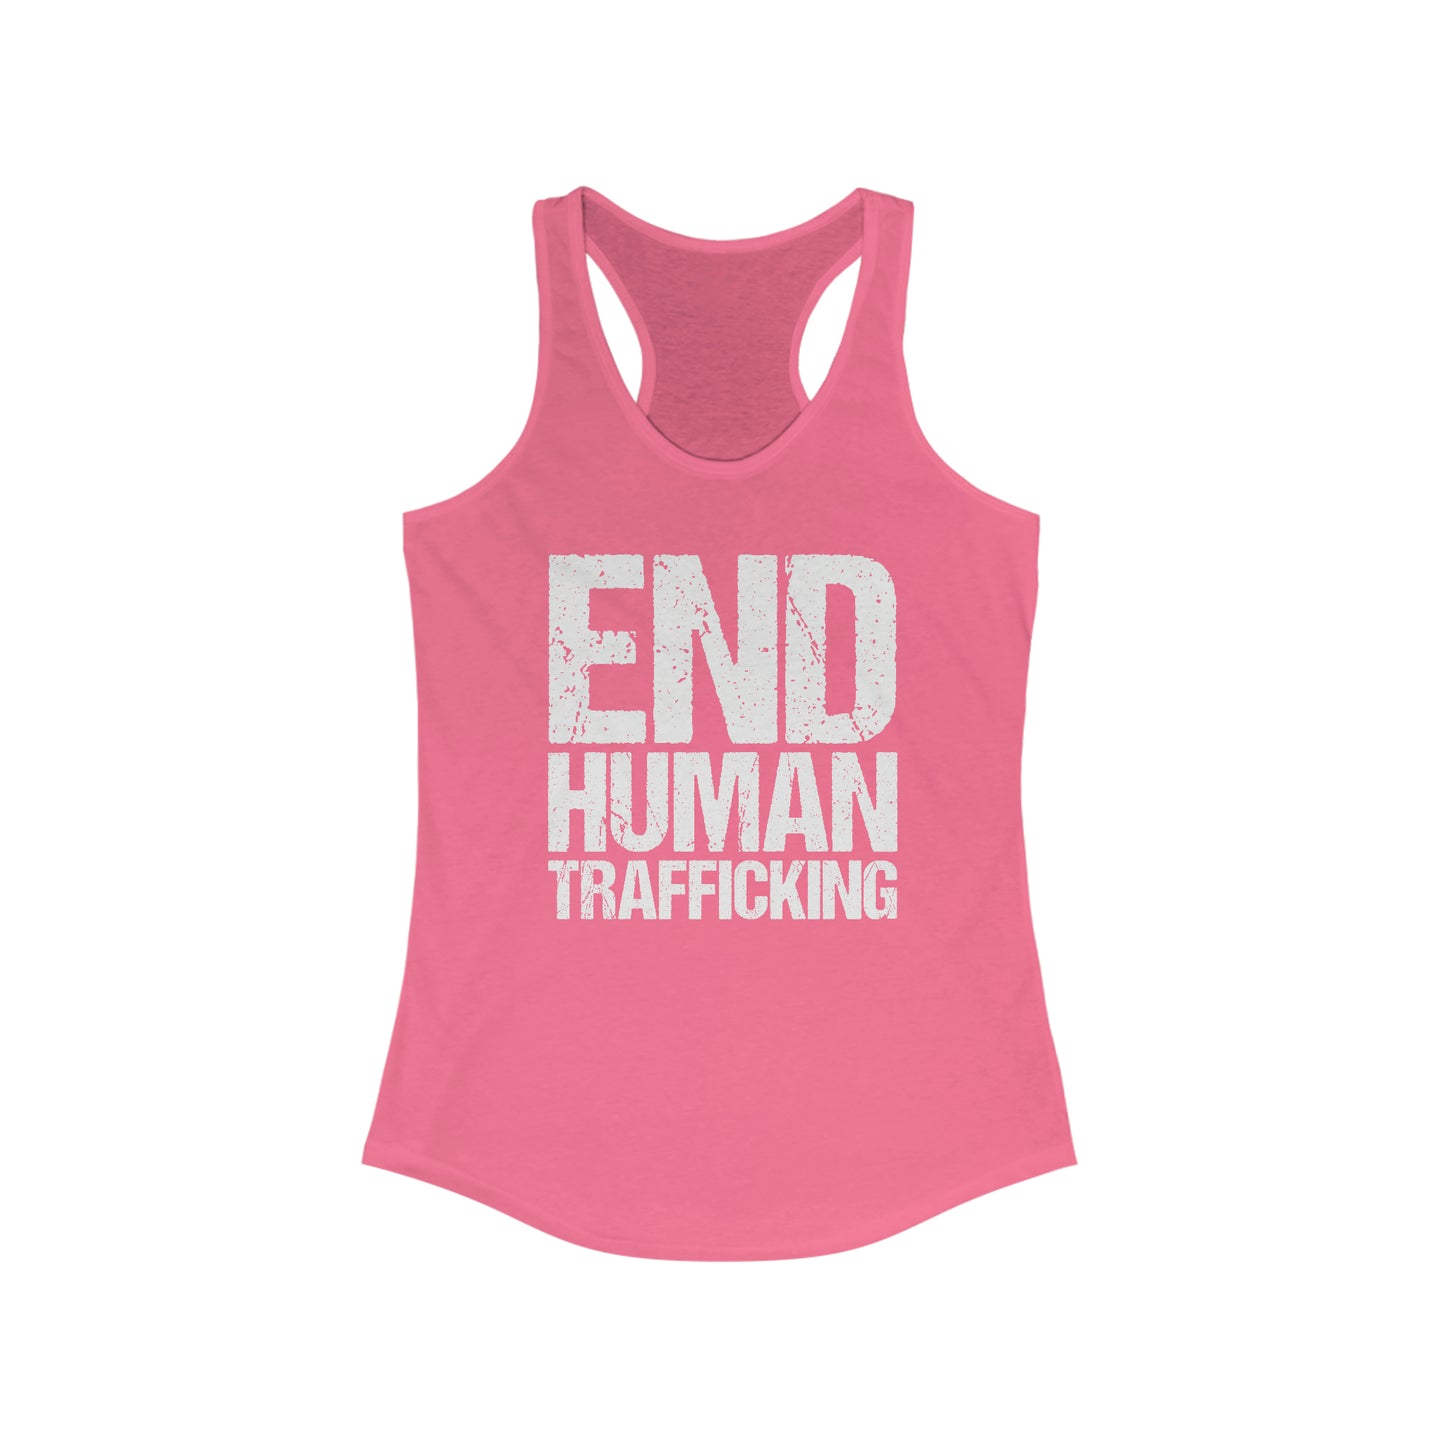 Human Trafficking Tank Top For Conservative Tank Top For Trafficking Awareness Tank Tops For A Cause Tank Tops For Women